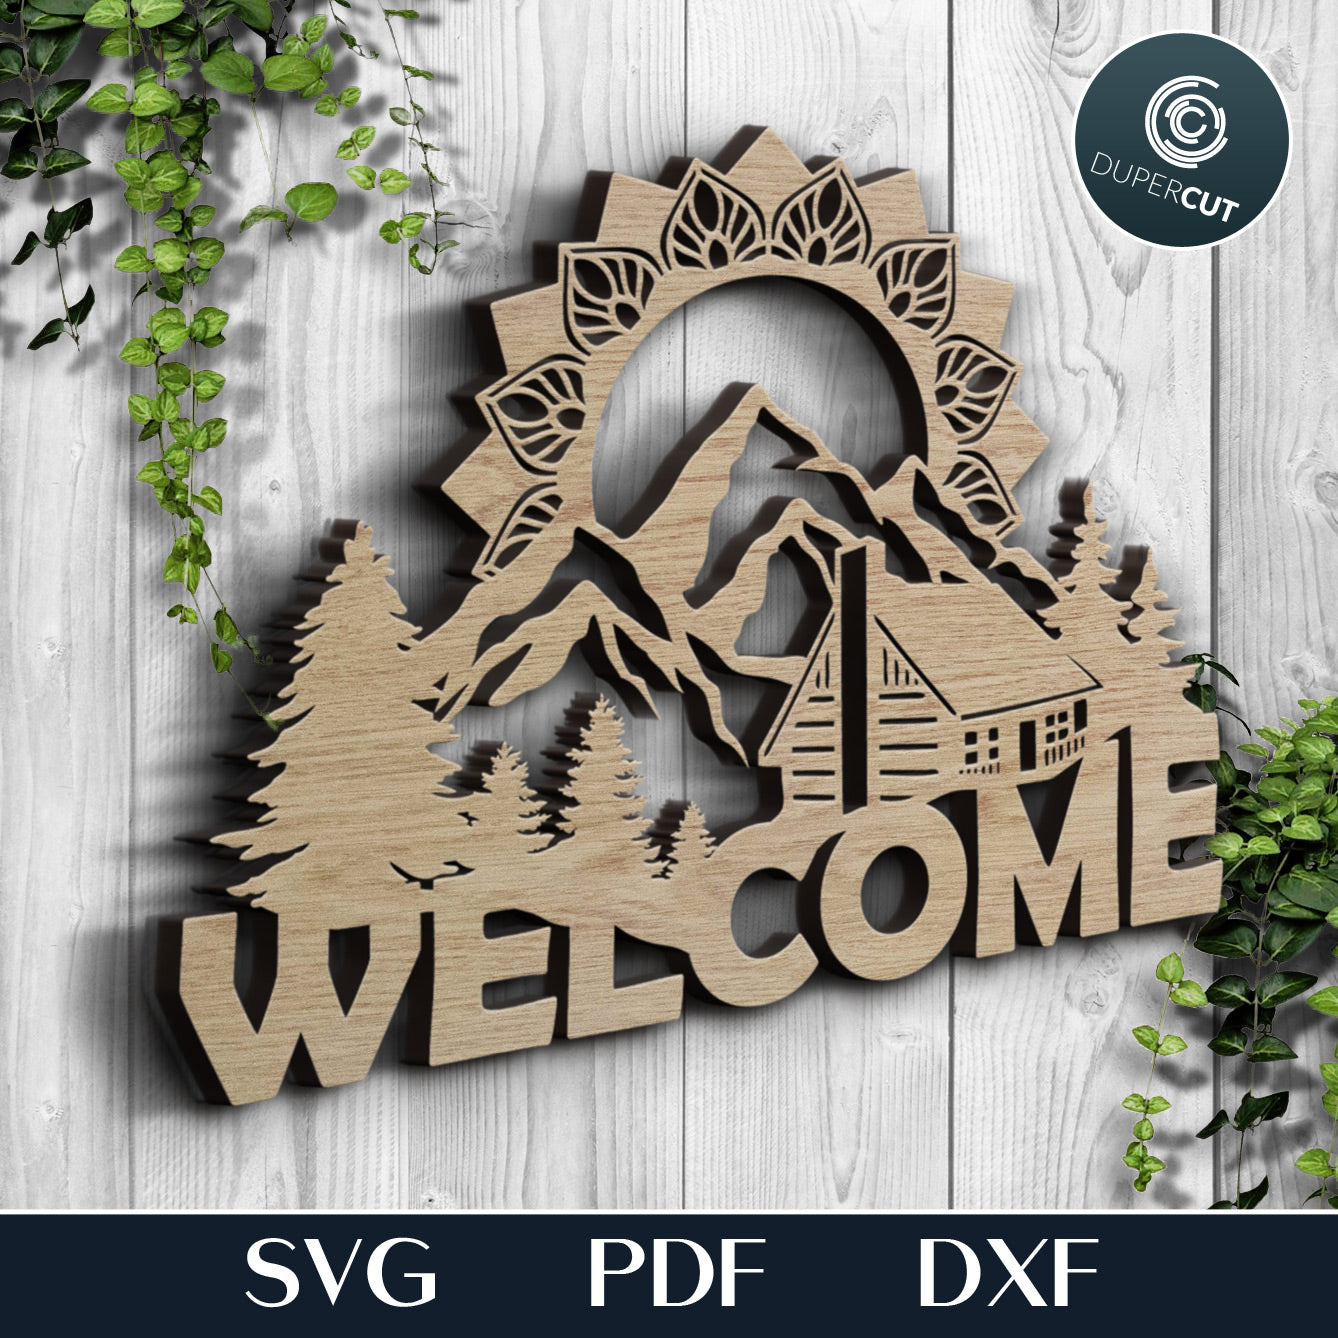 Mandala wilderness scene welcome sign - SVG PDF DXF vector files for laser cutting, engraving, Glowforge, CNC Plasma, Cricut, Silhouette Cameo